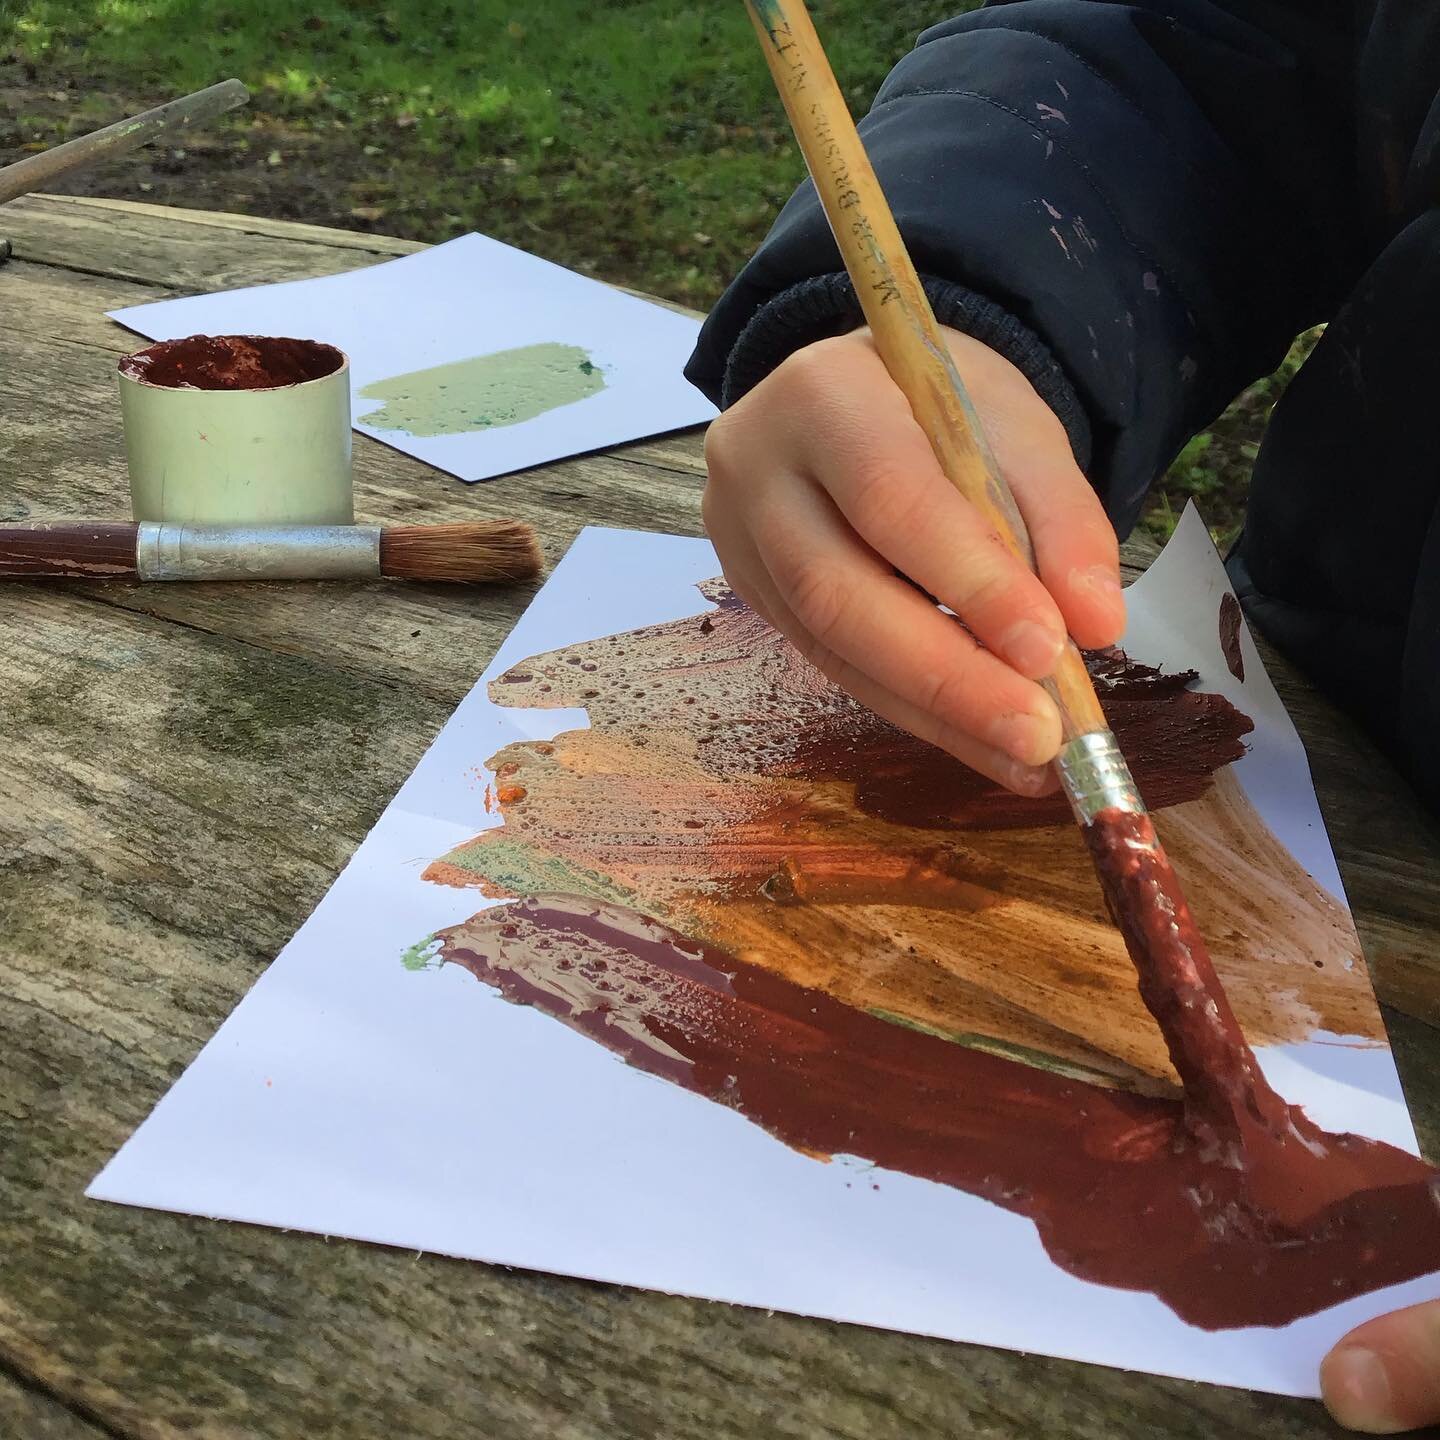 🍃 Last week at Forest School&hellip;

&hellip; we painted with coloured mud! The children helped to mix together the mud and powder paint before getting creative both together and individually 🖌✨